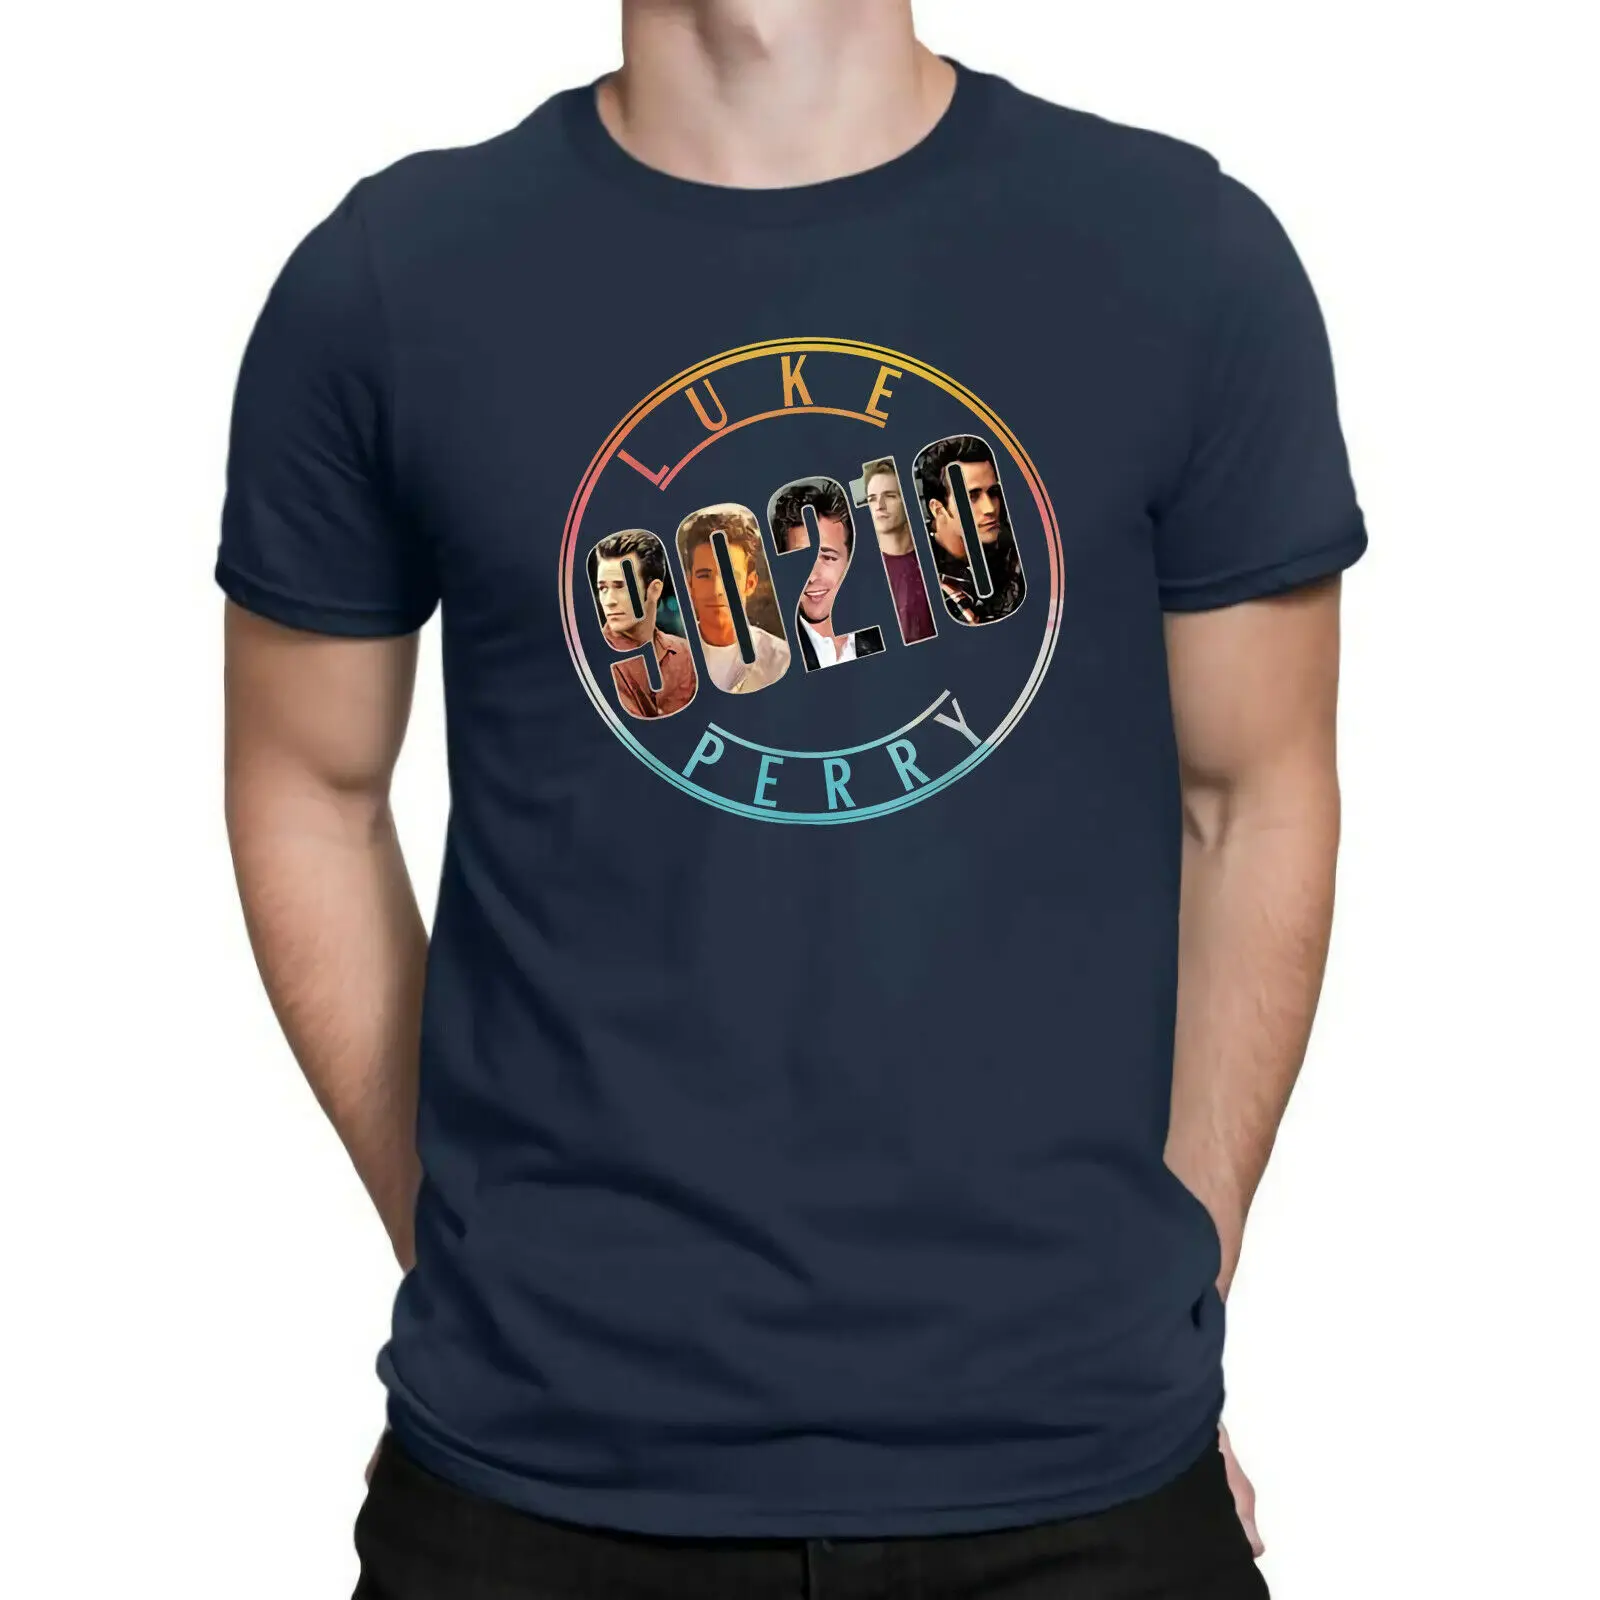 

Beverly Hills 90210 Luke Perry Dillion T Shirt Dylan Mckay Retro Tee Cotton Top Unisex Tees